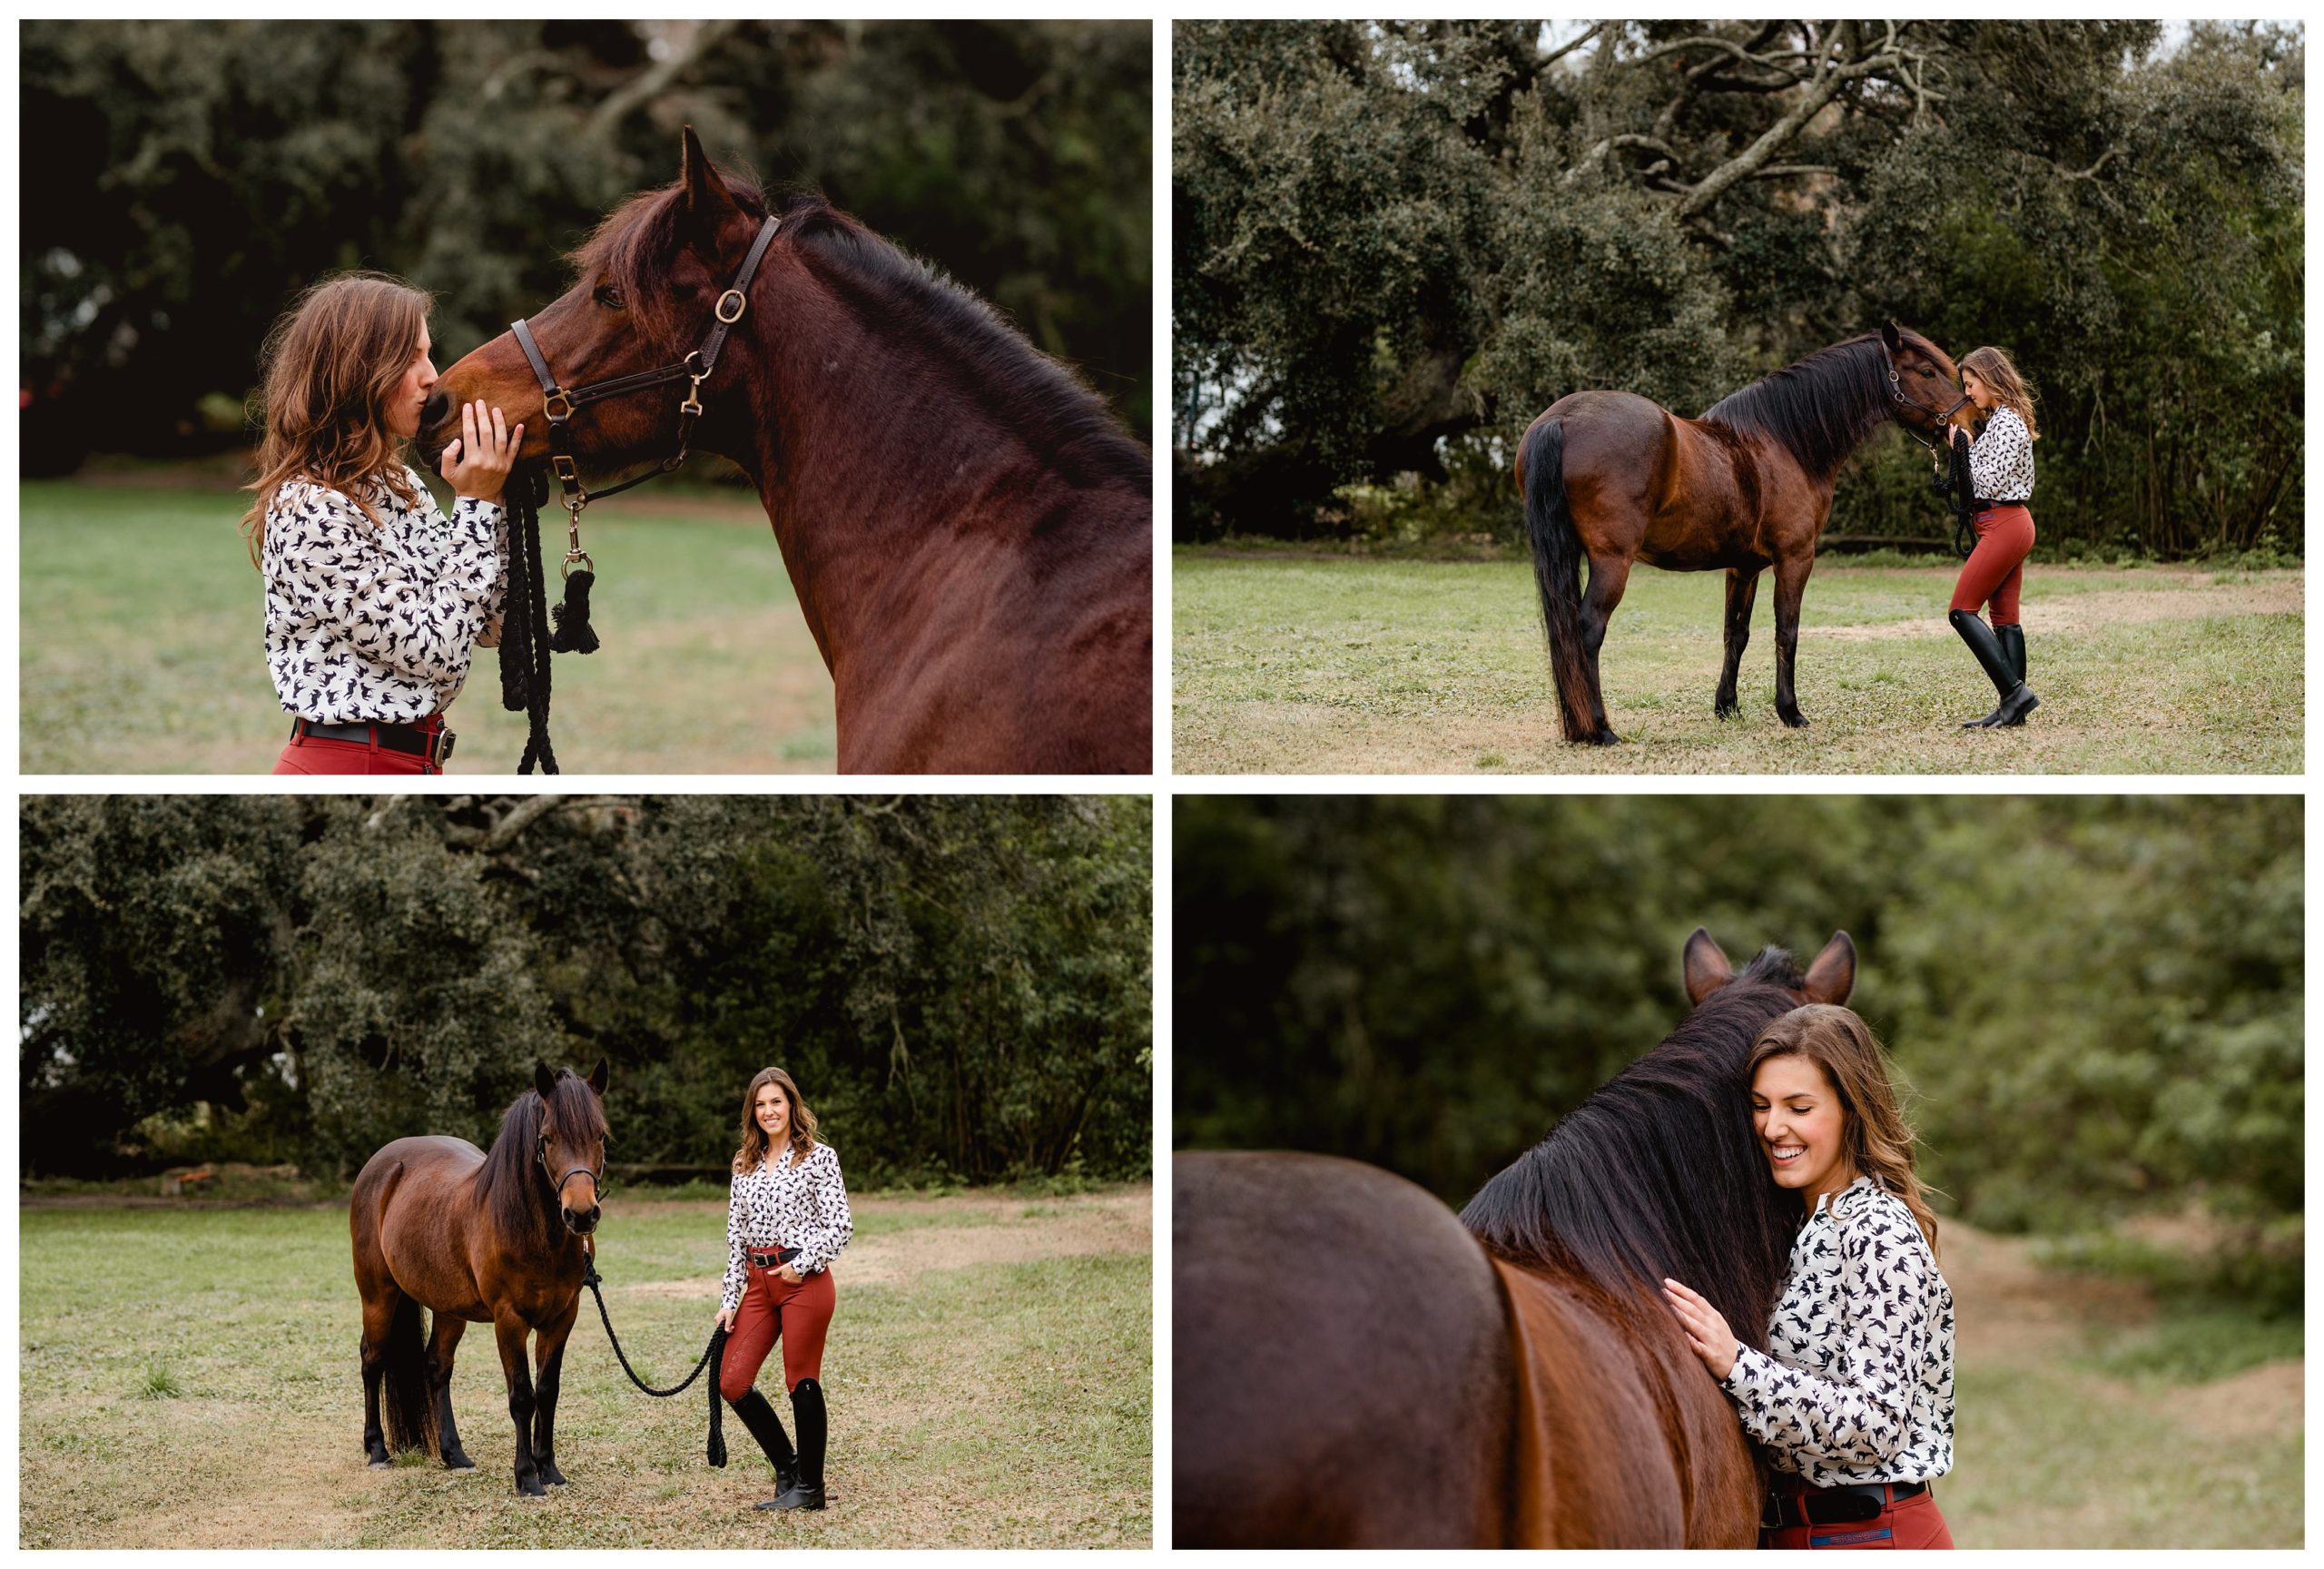 Dressage pony has professional photo shoot with an equine photographer in Florida.